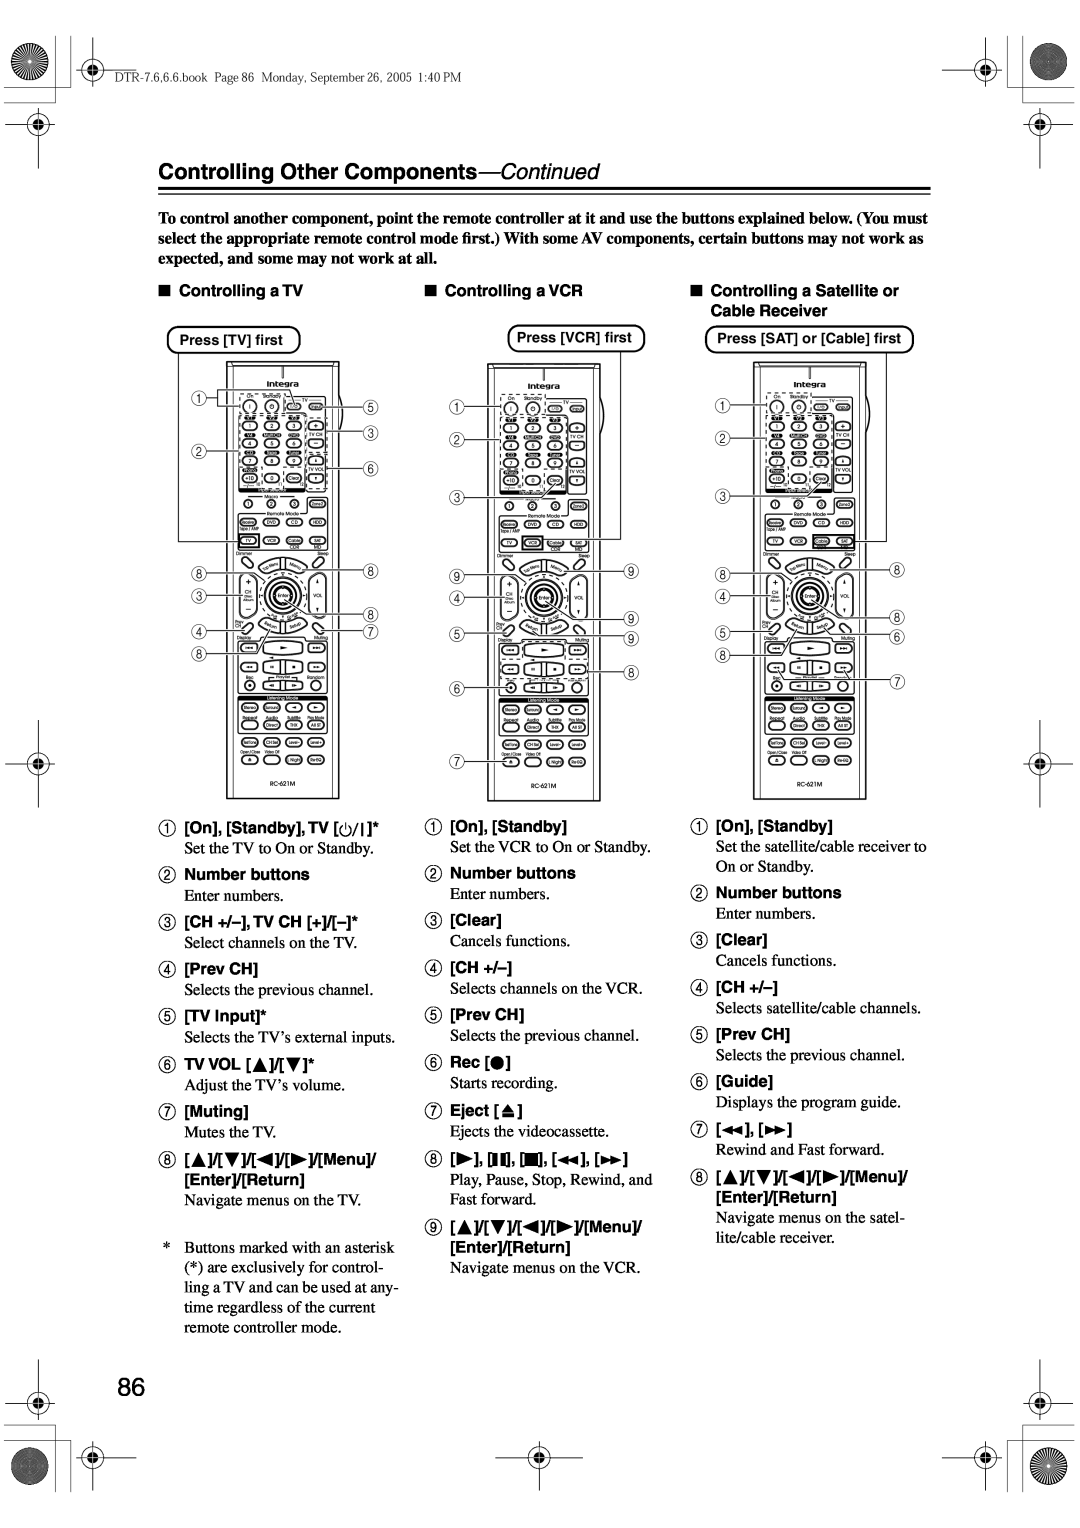 Integra DTR-7.6/6.6 instruction manual Controlling Other Components—Continued 